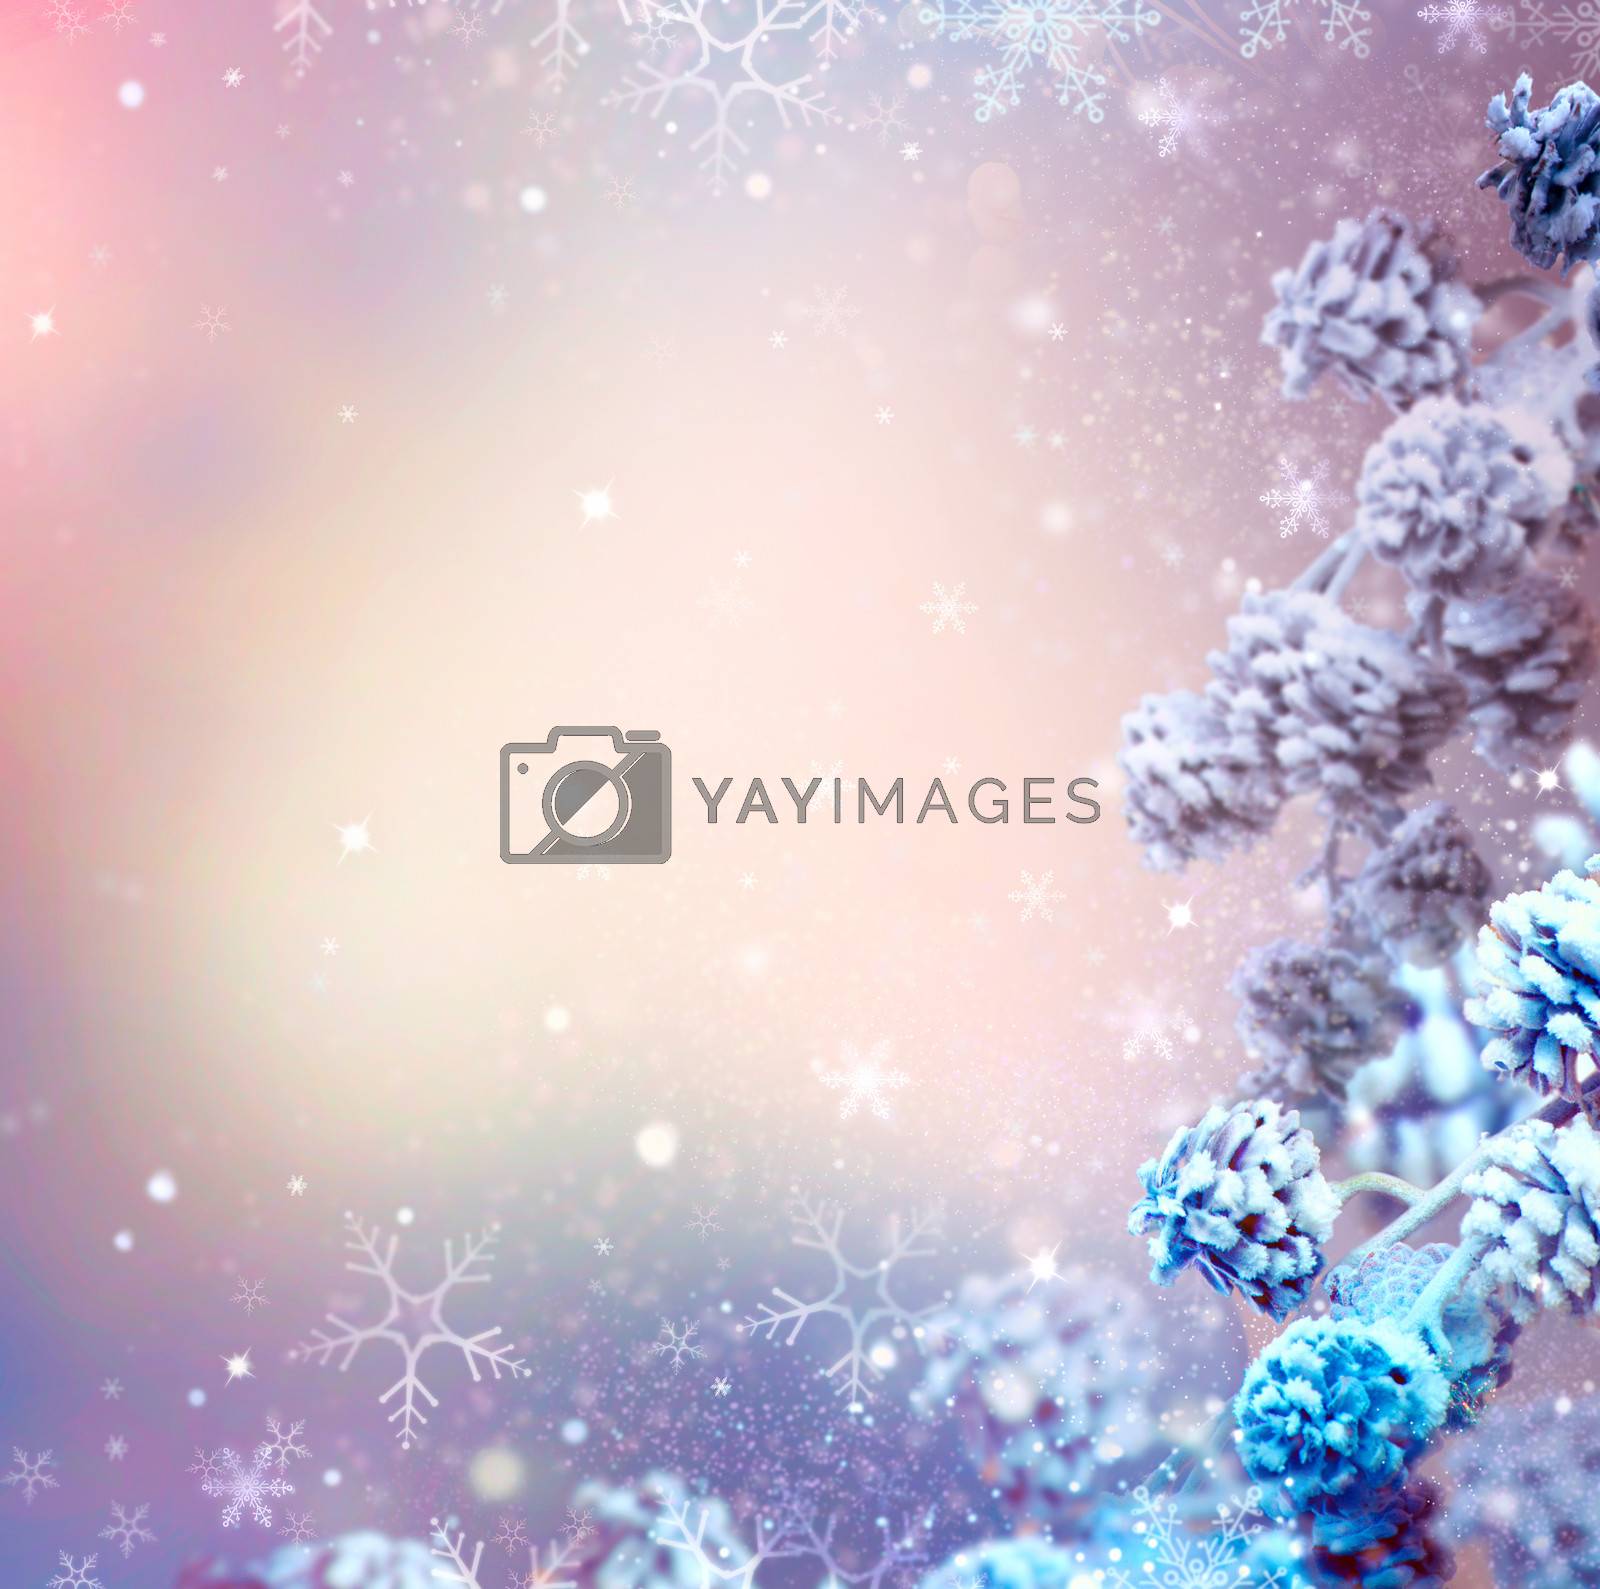 Royalty free image of Winter Holiday Christmas and New Year Snow Background by SubbotinaA